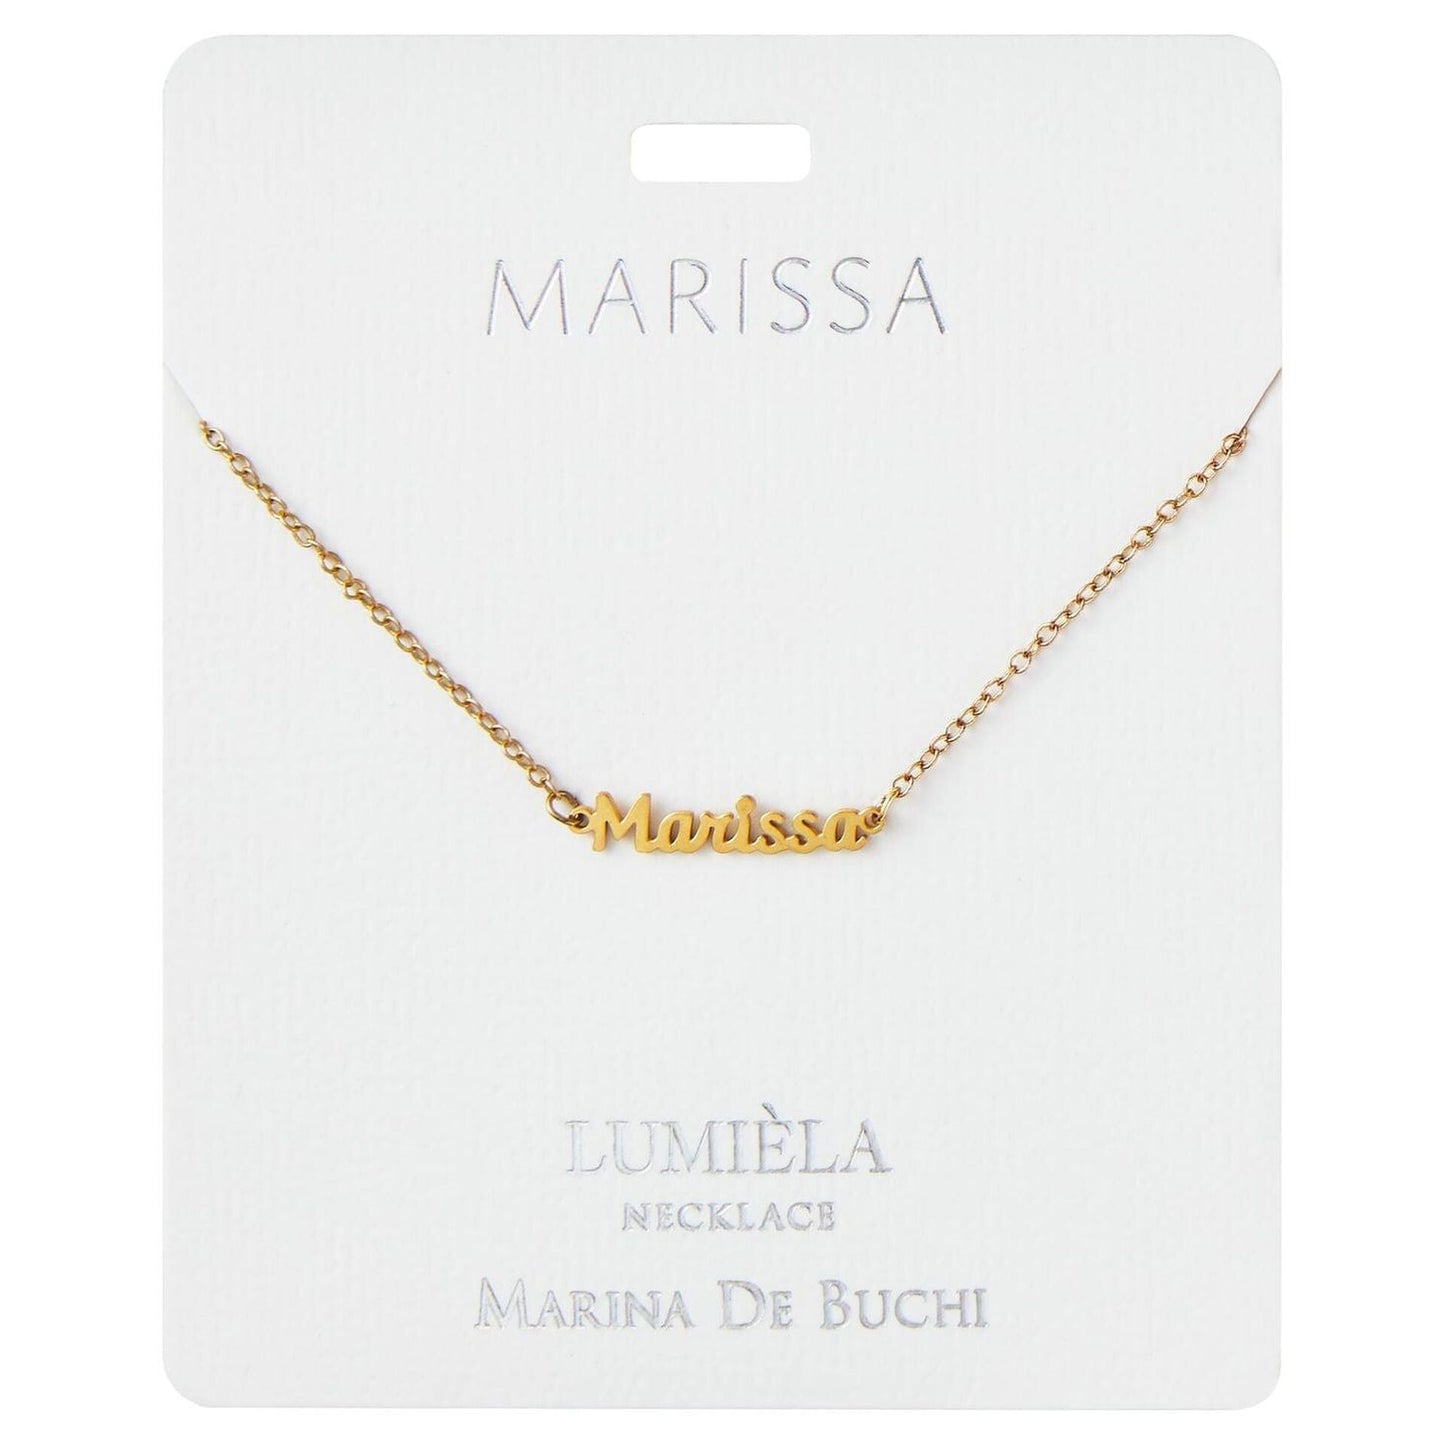 Lumiela Personalized Nameplate Haley Necklace in Gold Tone